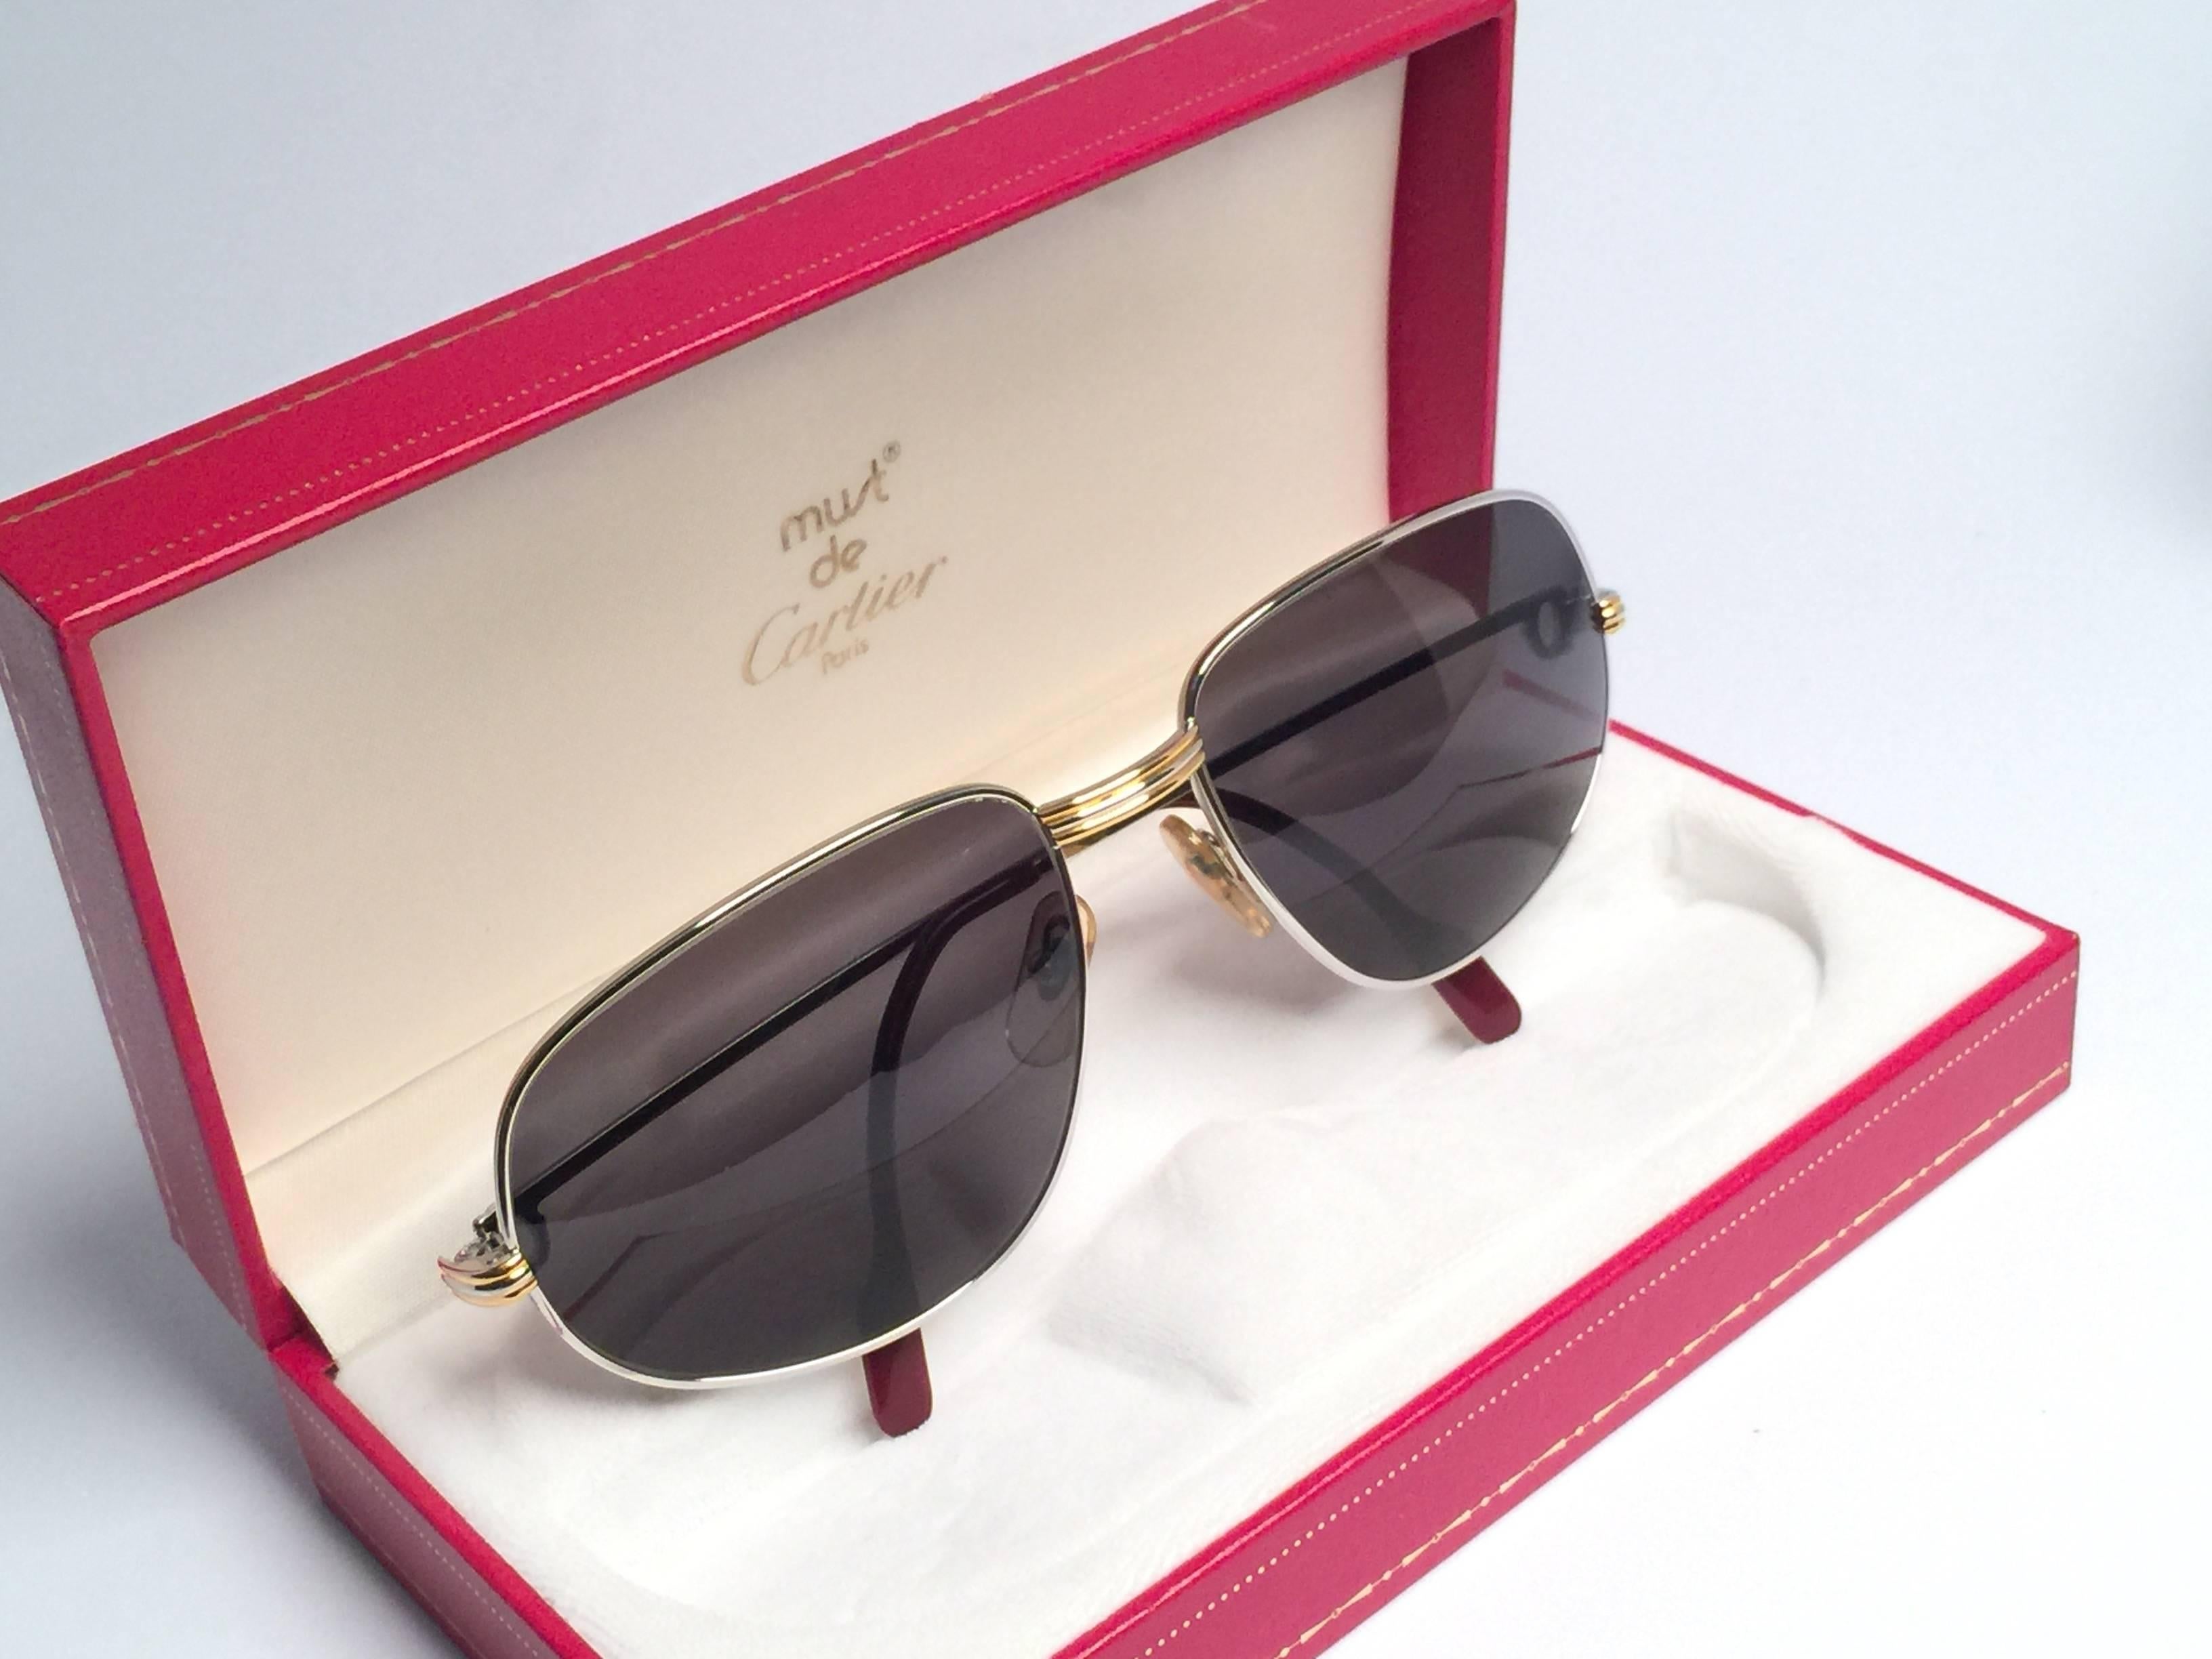 Vintage Cartier Romance Vendome Platinum sunglasses with G15 grey (uv protection)lenses.  Frame is with the front and sides in yellow and white gold. All hallmarks. Red enamel with Cartier gold signs on the ear paddles. Both arms sport the C from